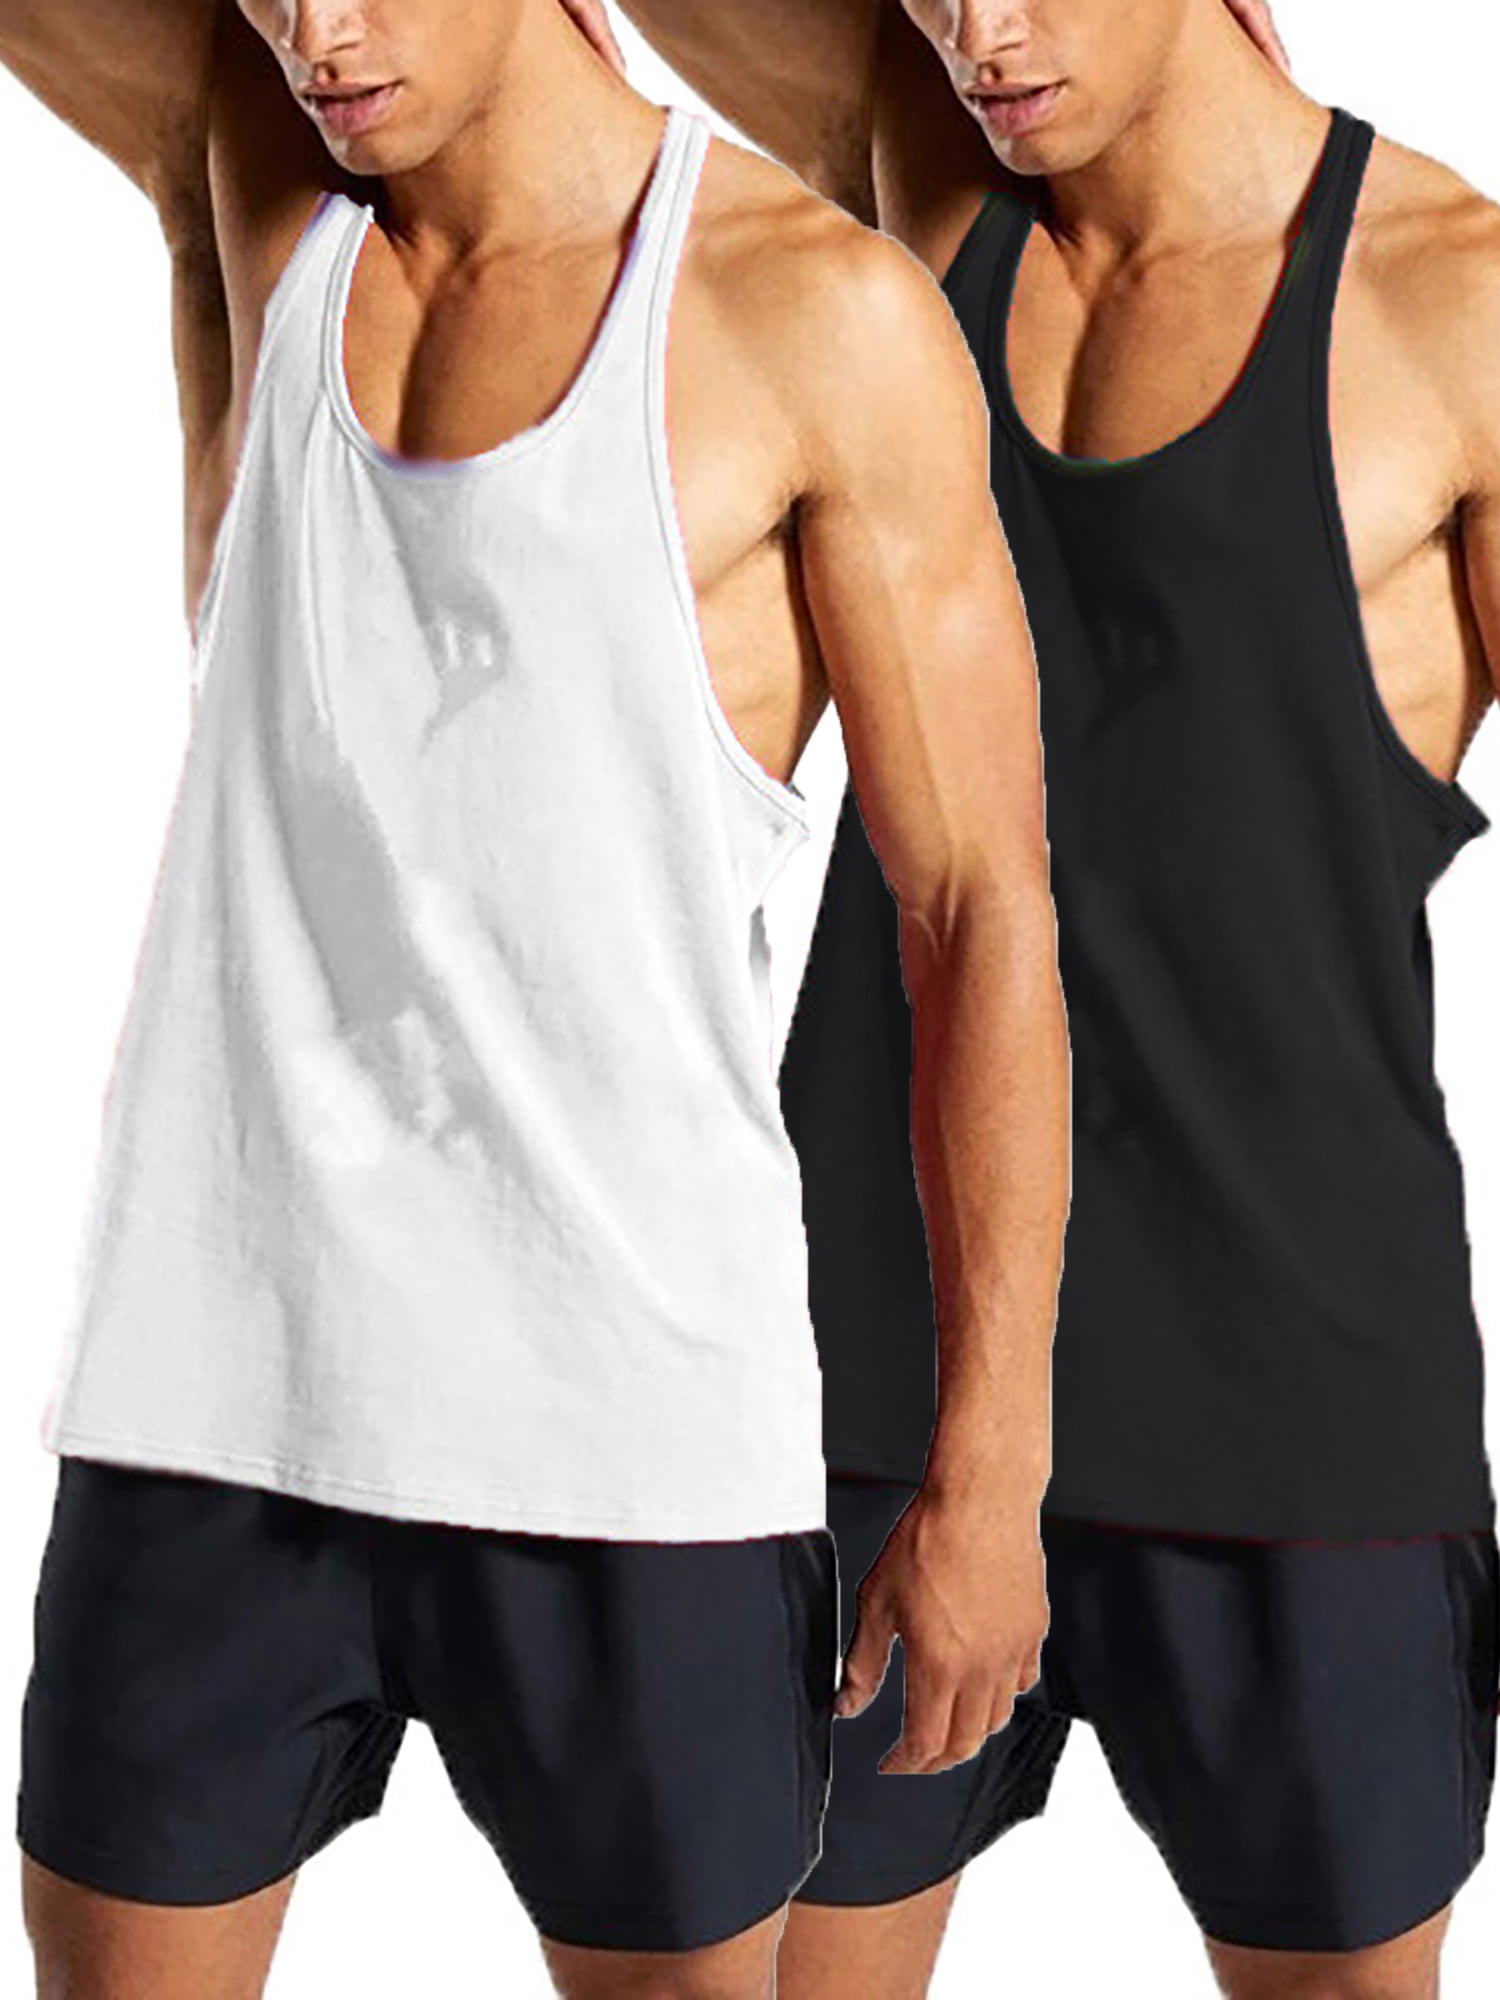 Mens Cotton Workout Tank Tops Dry Fit Gym Bodybuilding Training Fitness Sleeveless Muscle T Shirts